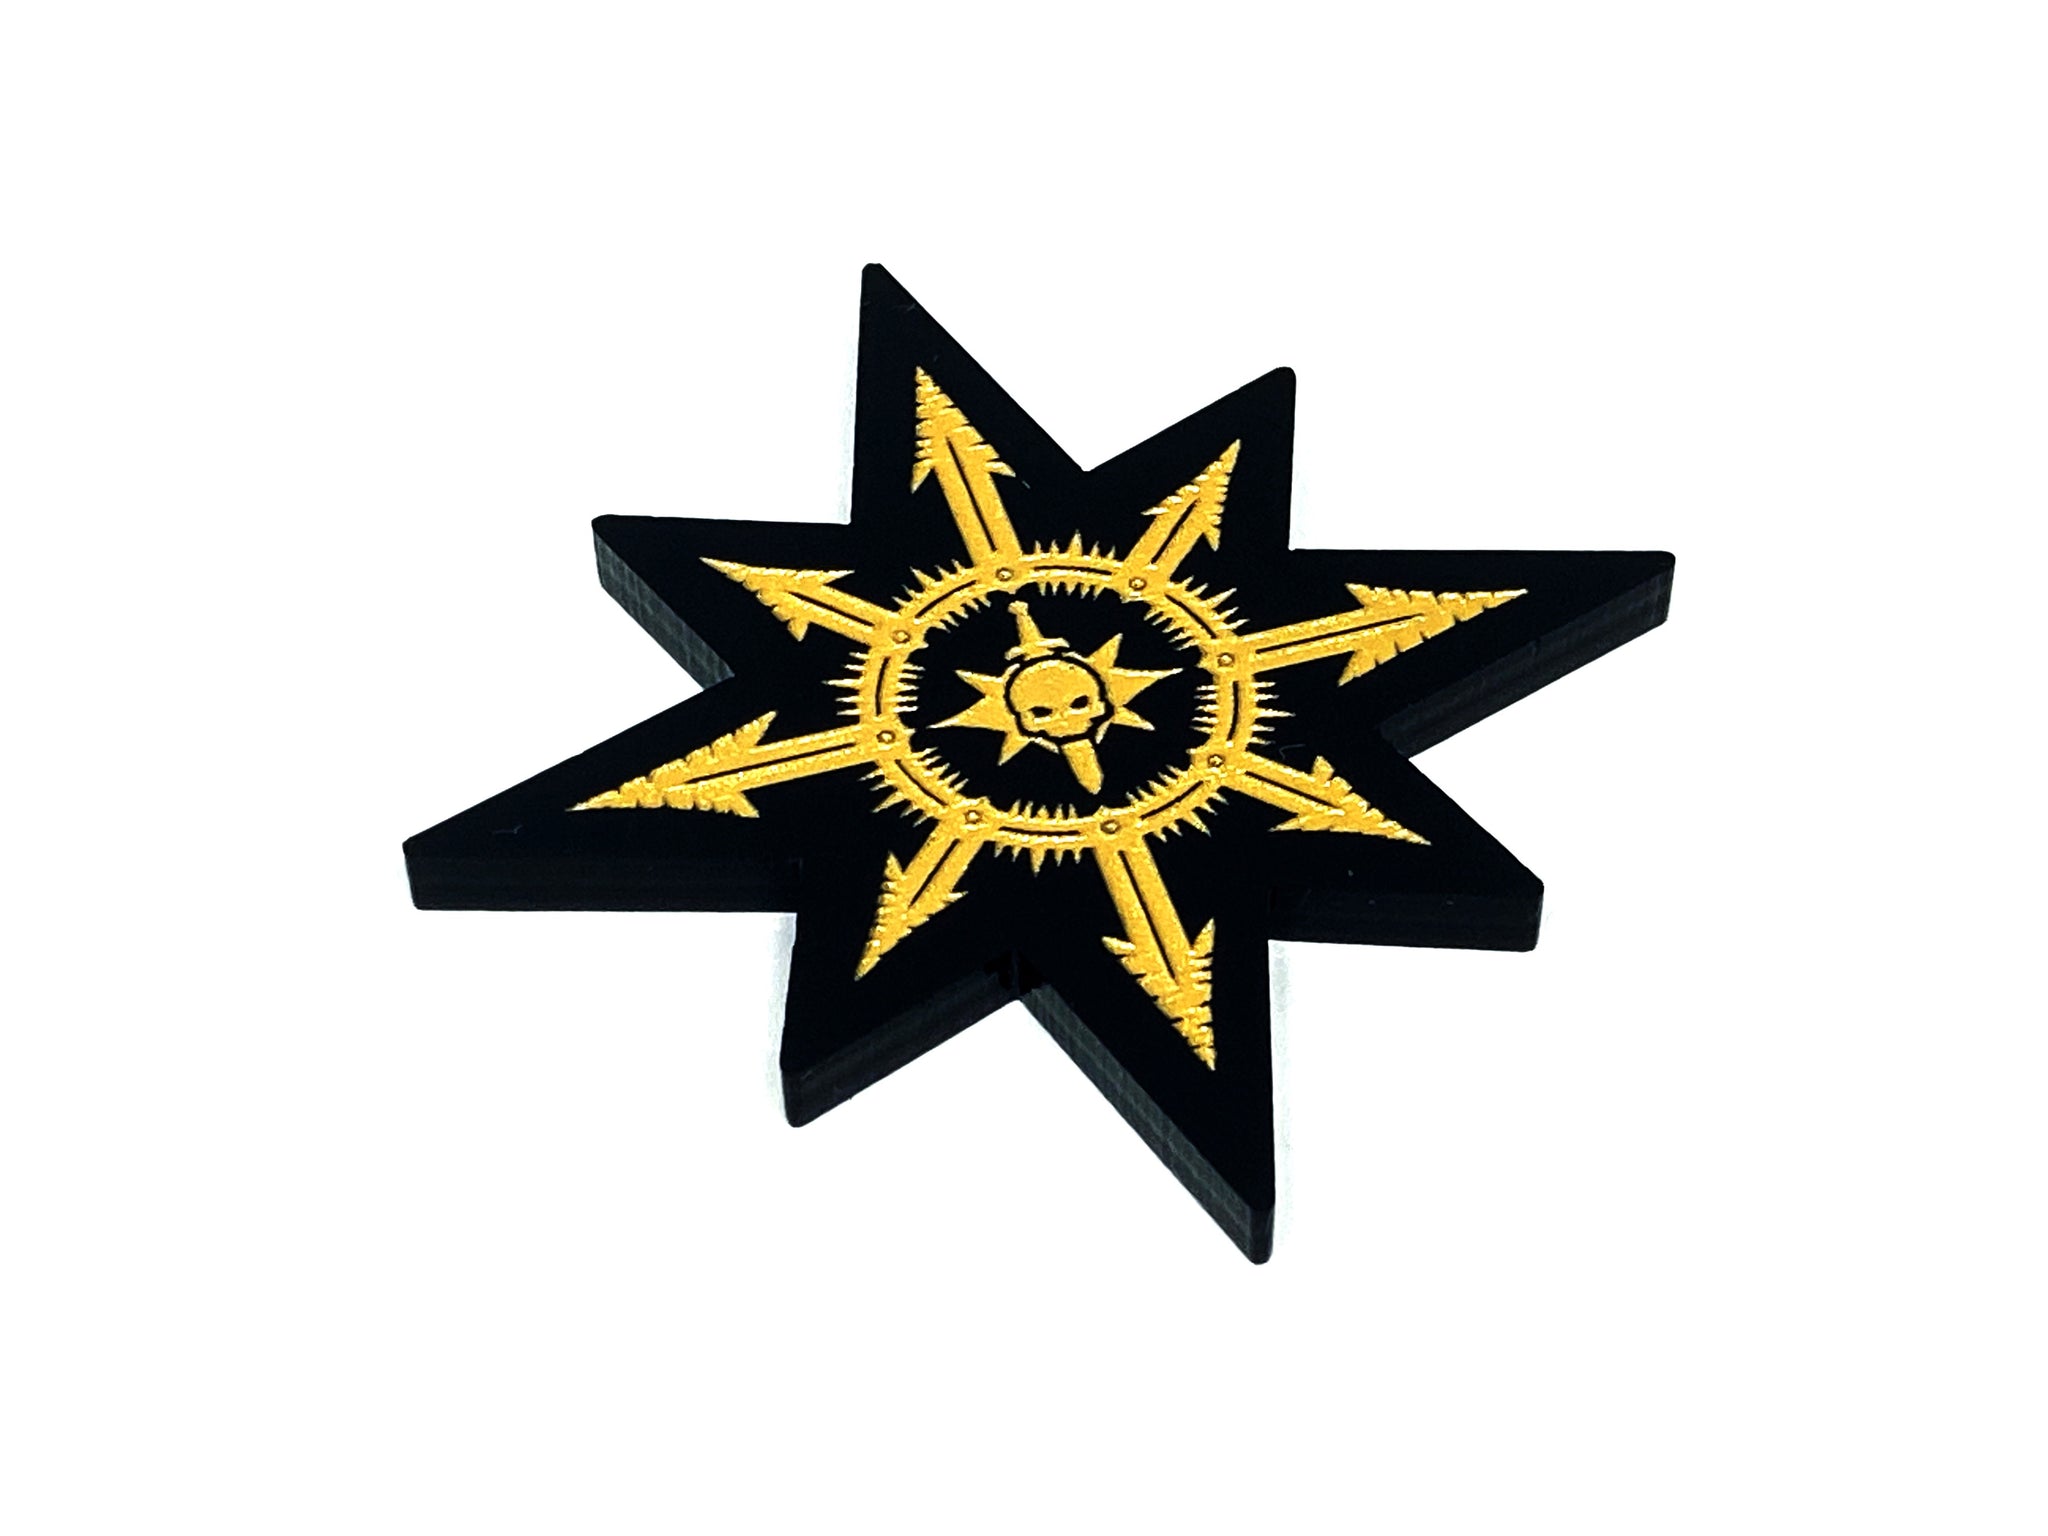 Initiative token for Warcry